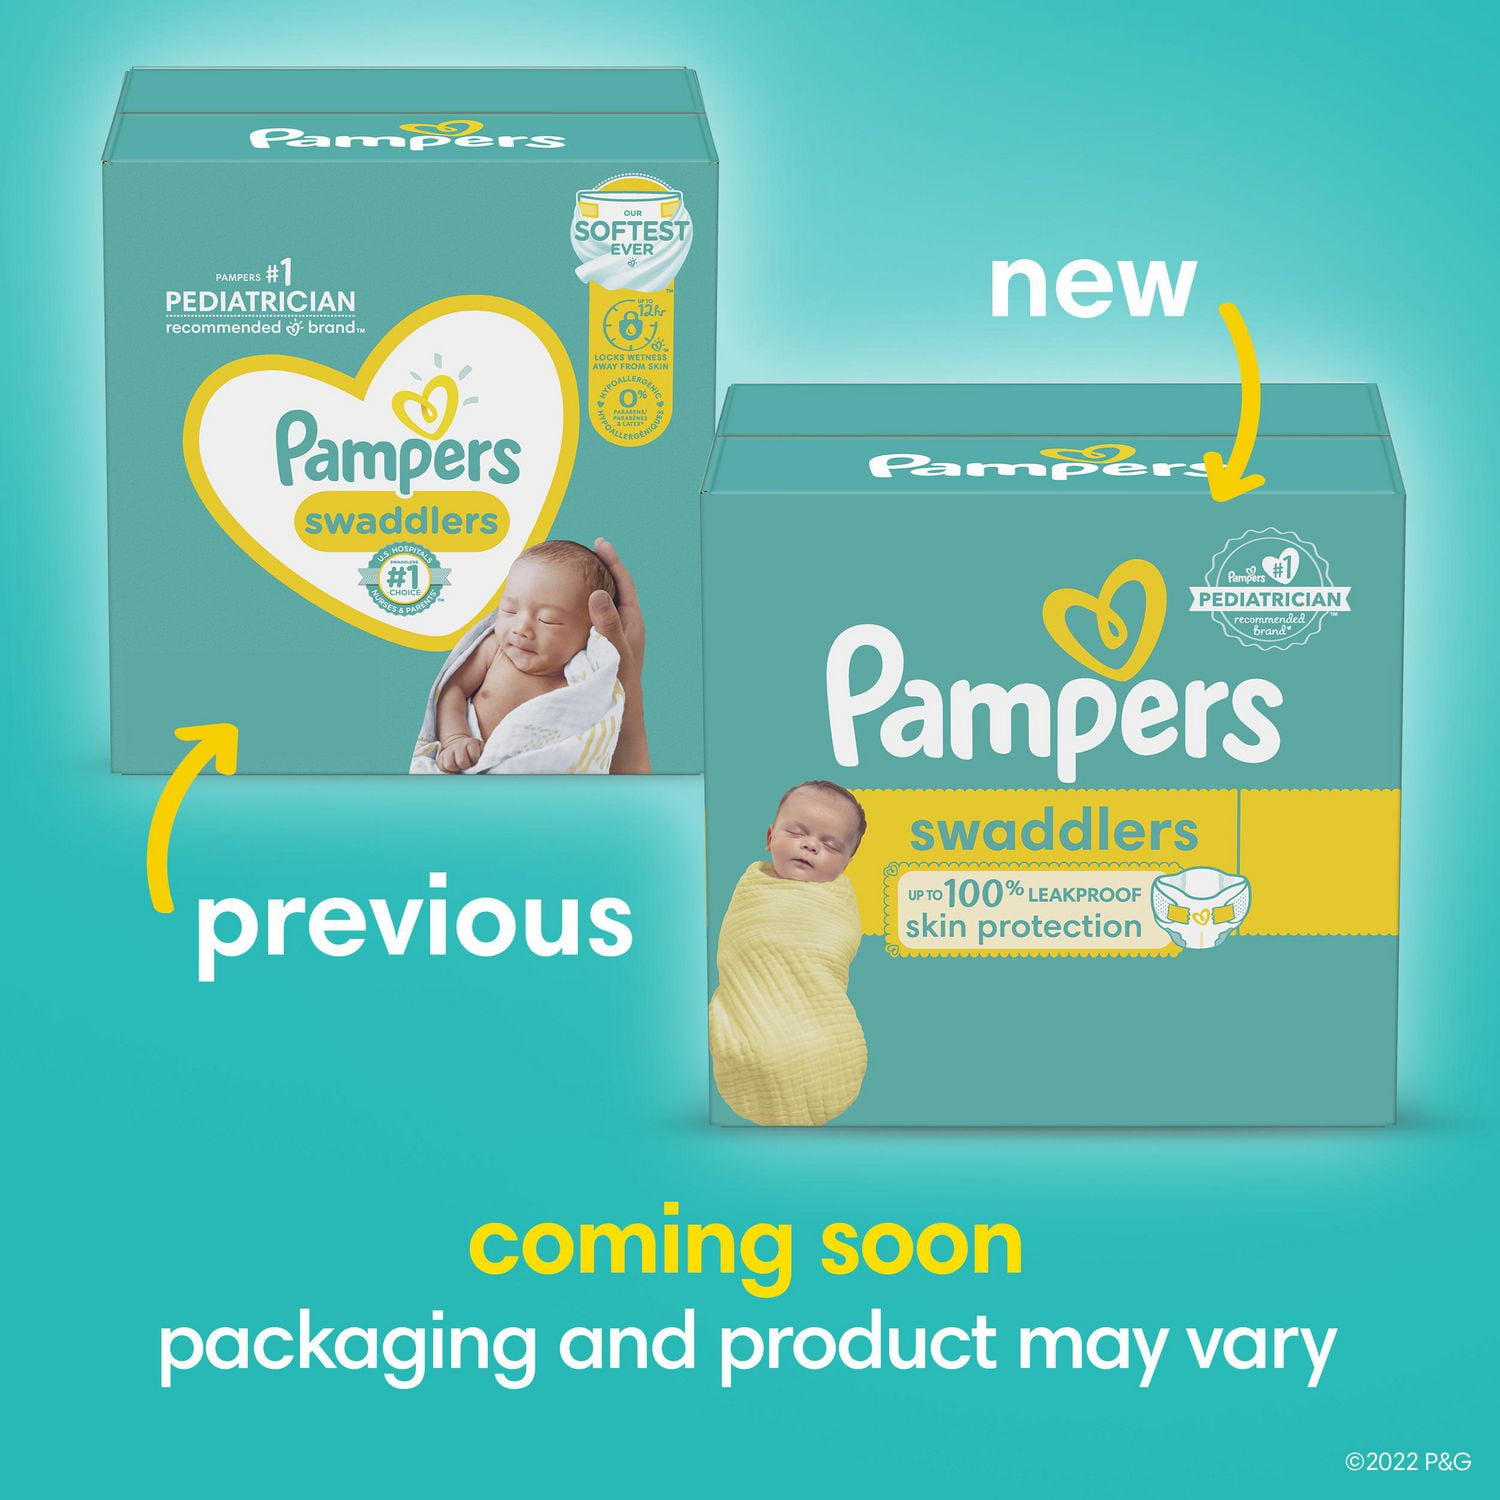 Pampers Swaddlers Diapers - Super Pack, Sizes NB-7, 84-44 Count